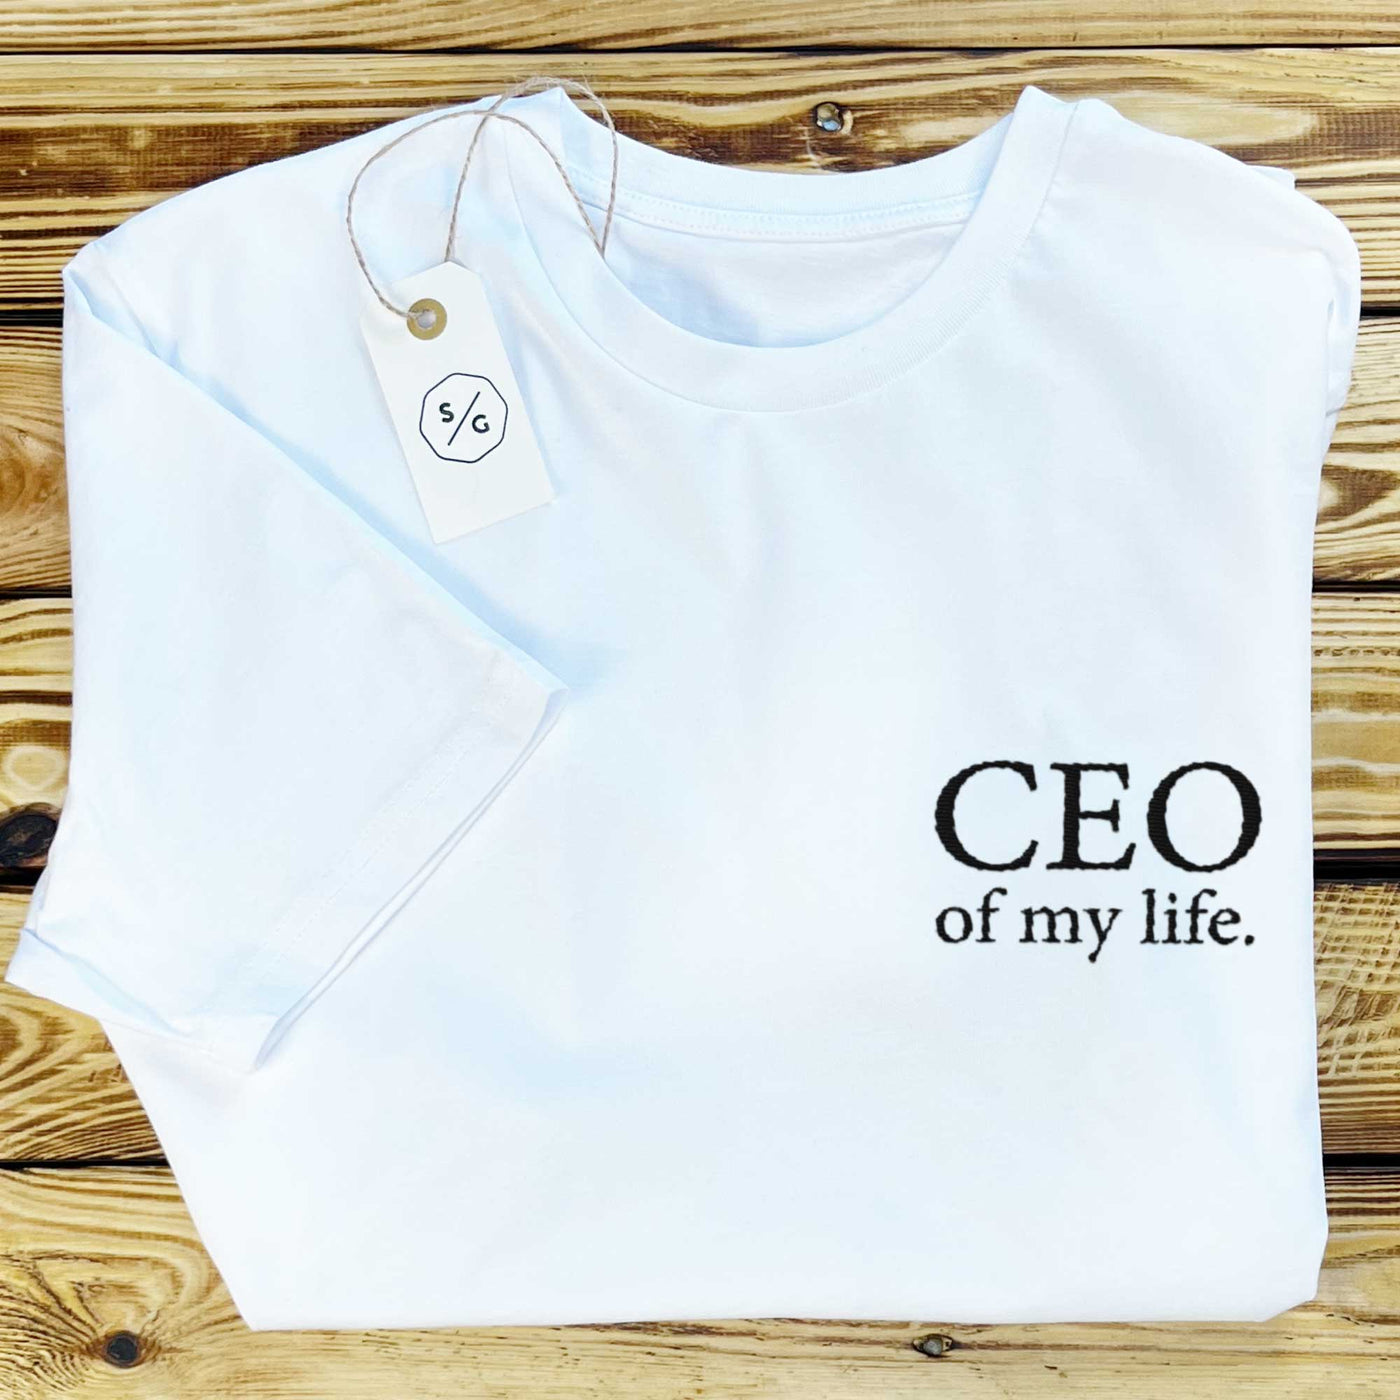 EMBROIDERED T-SHIRT DRESS • CEO OF MY LIFE